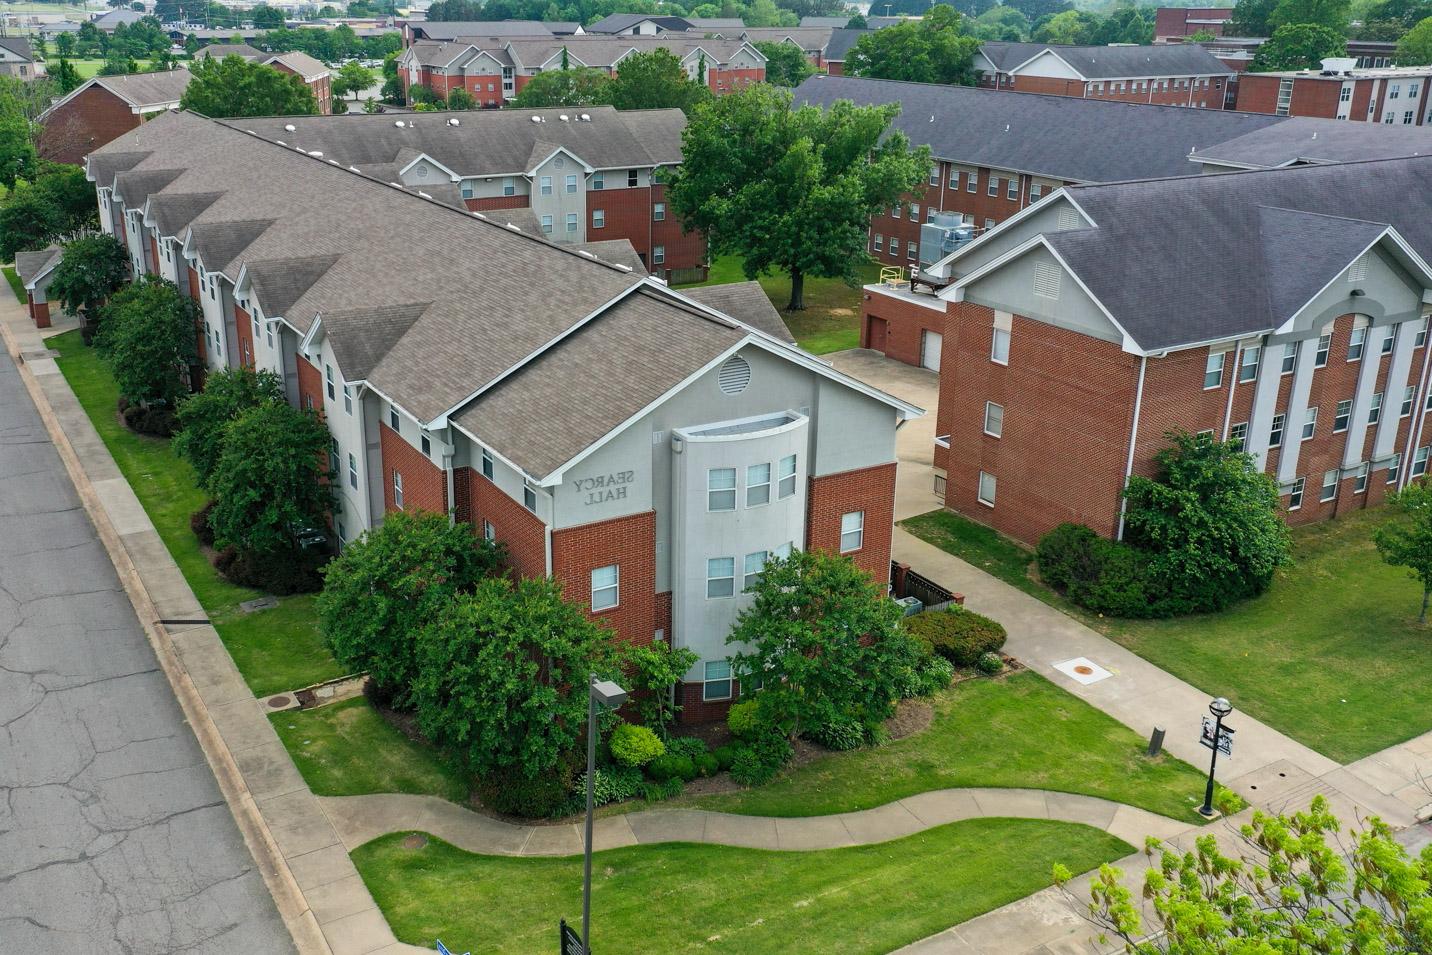 This is a photo of Searcy Hall, a women's residence hall at Harding University.